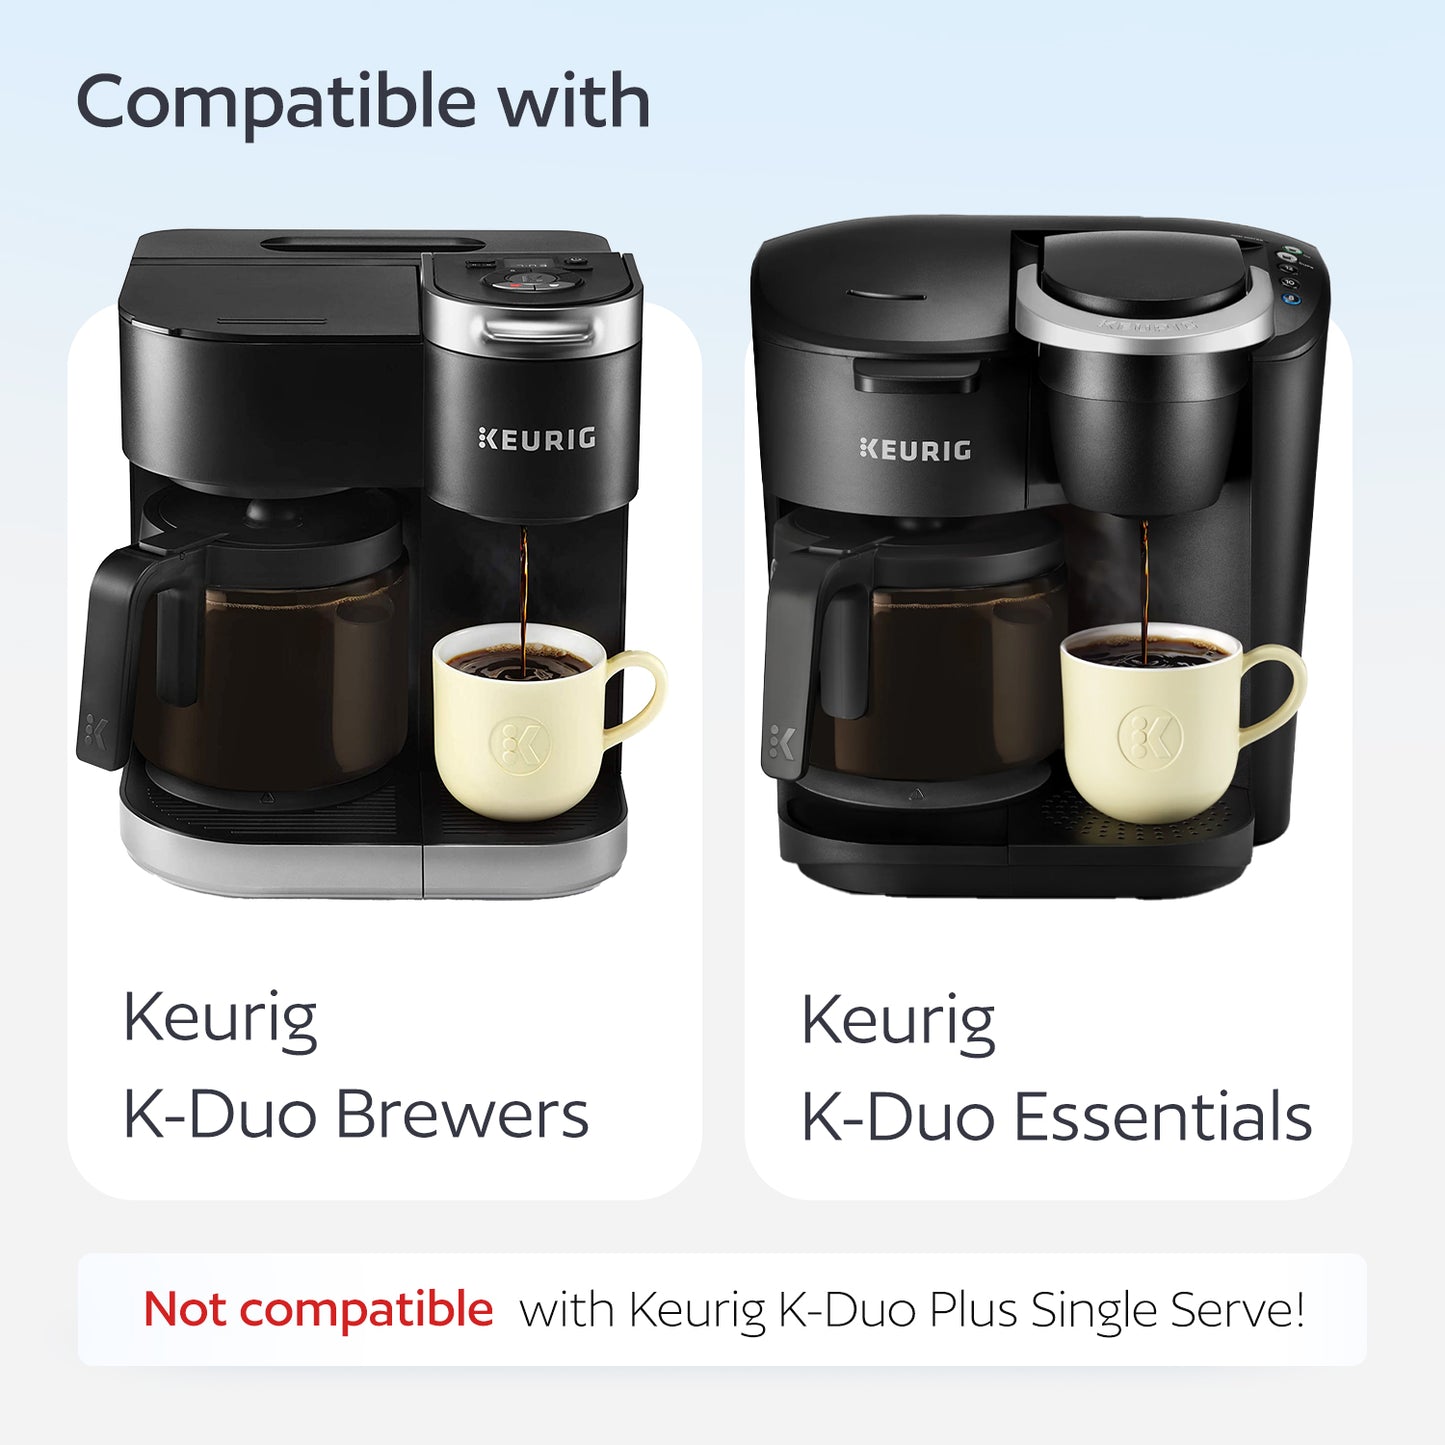 Keurig K Duo Coffee Filter and 2 Reusable K Cups for K-Duo Essentials, K-Duo Brewers Only - Carafe Basket Coffee Filters and 2 Refillable Kcups for Keurig Duo, K-Duo Essentials Coffee Makers